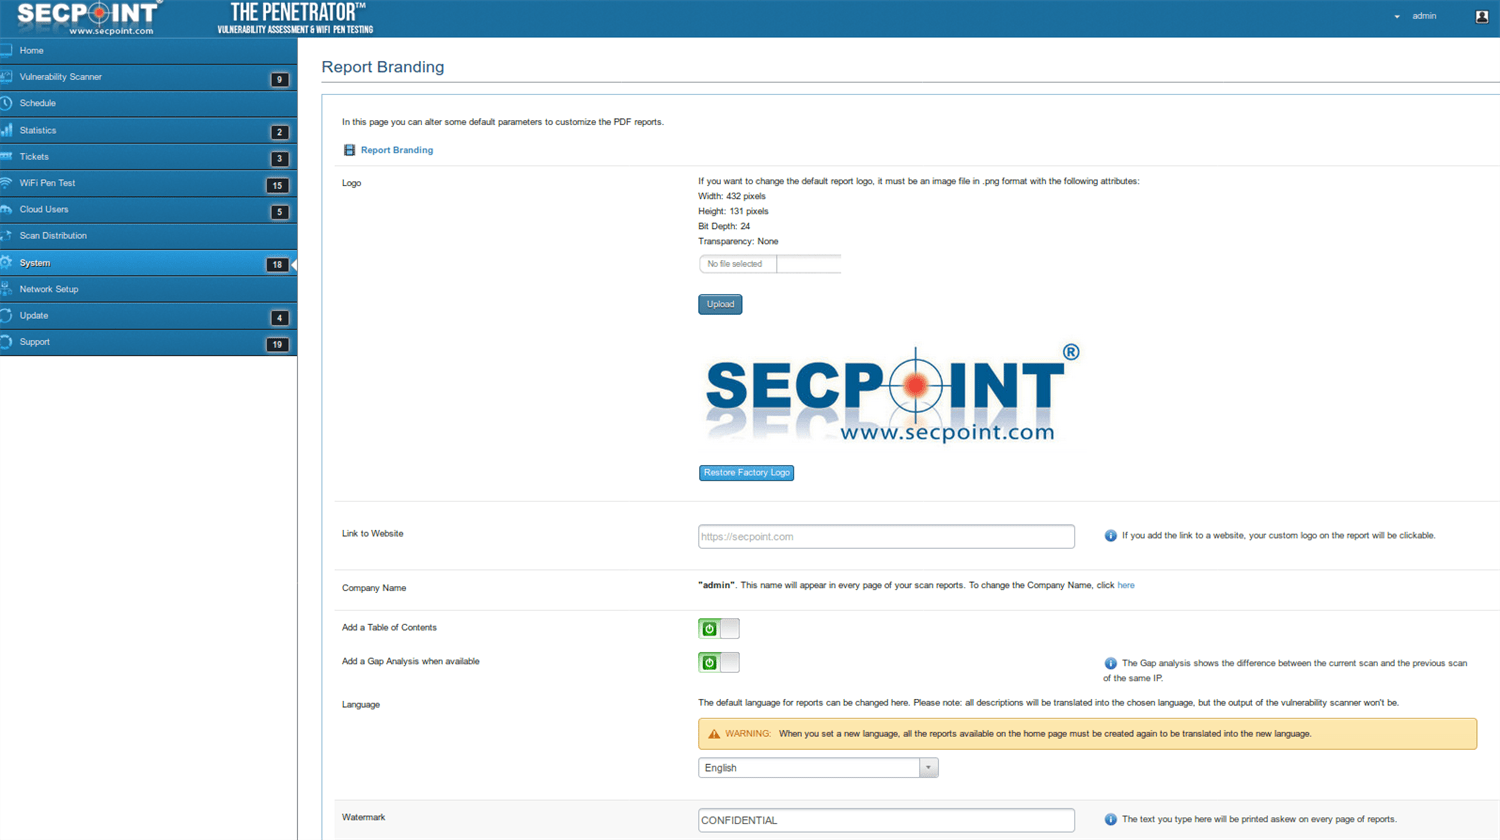 SecPoint Penetrator S9 - 8 IP Concurrent Scan License Vulnerability Scanning (1 Year License) - SecPoint